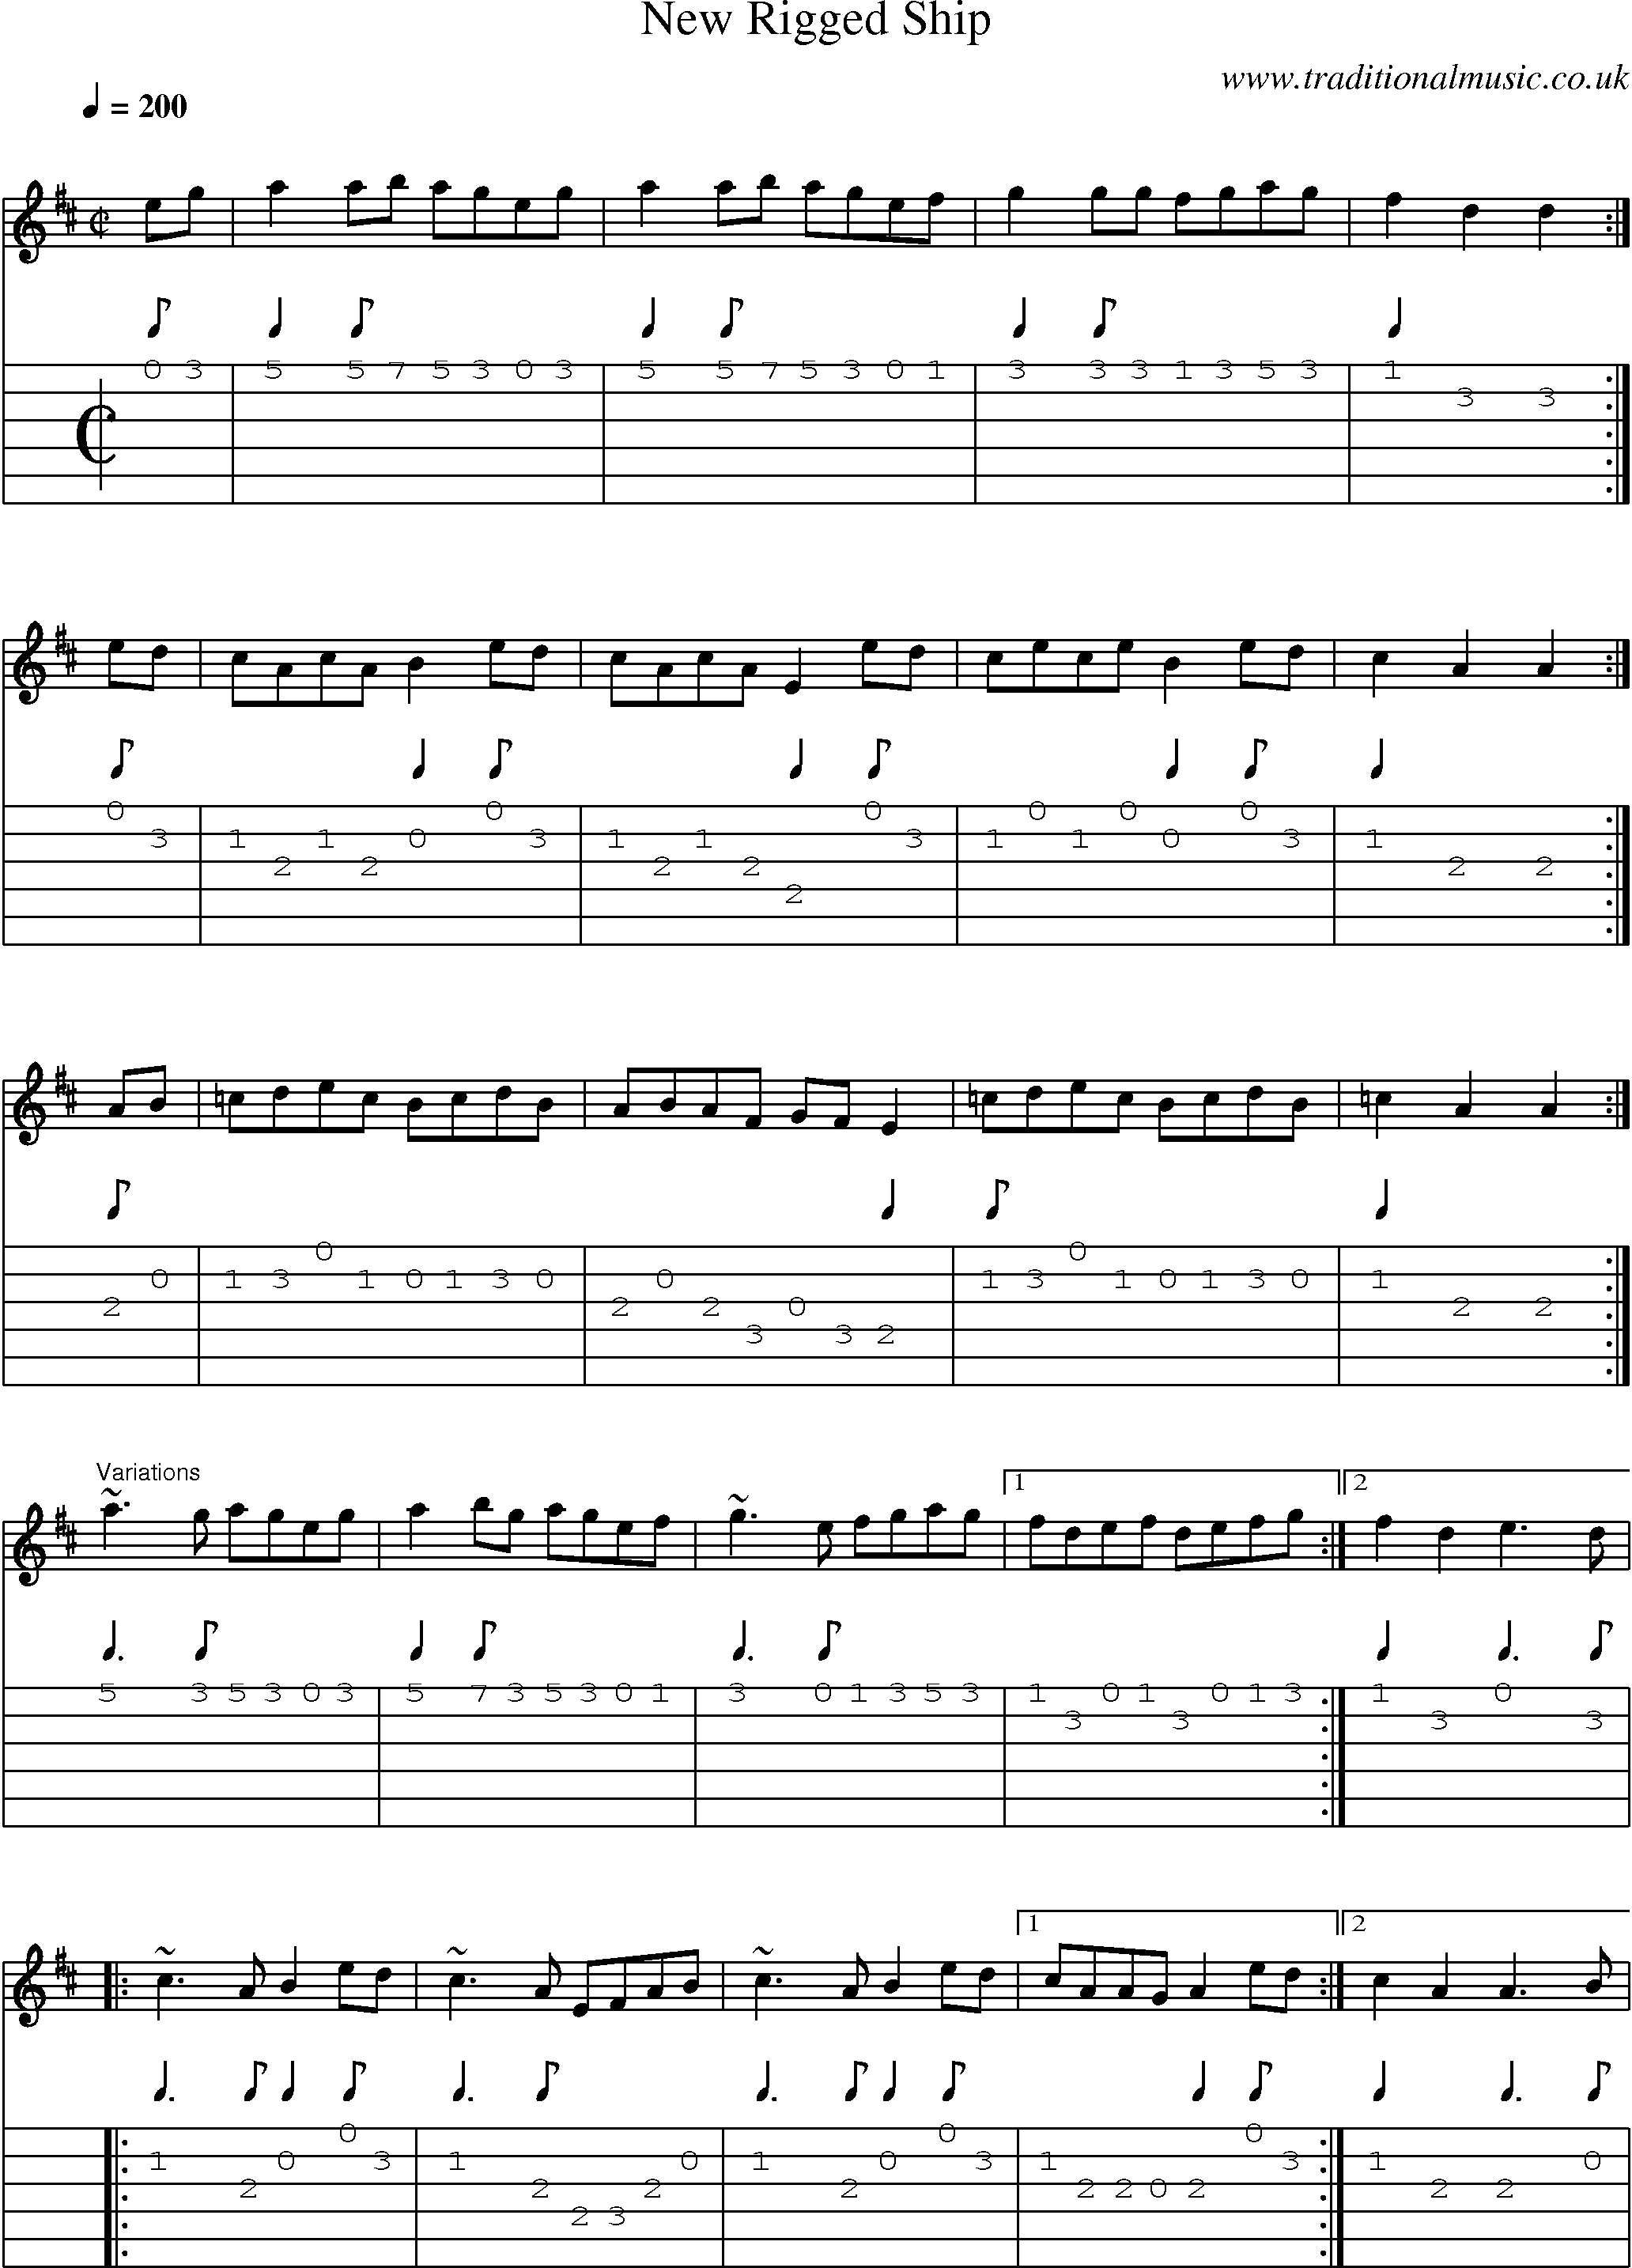 Music Score and Guitar Tabs for New Rigged Ship